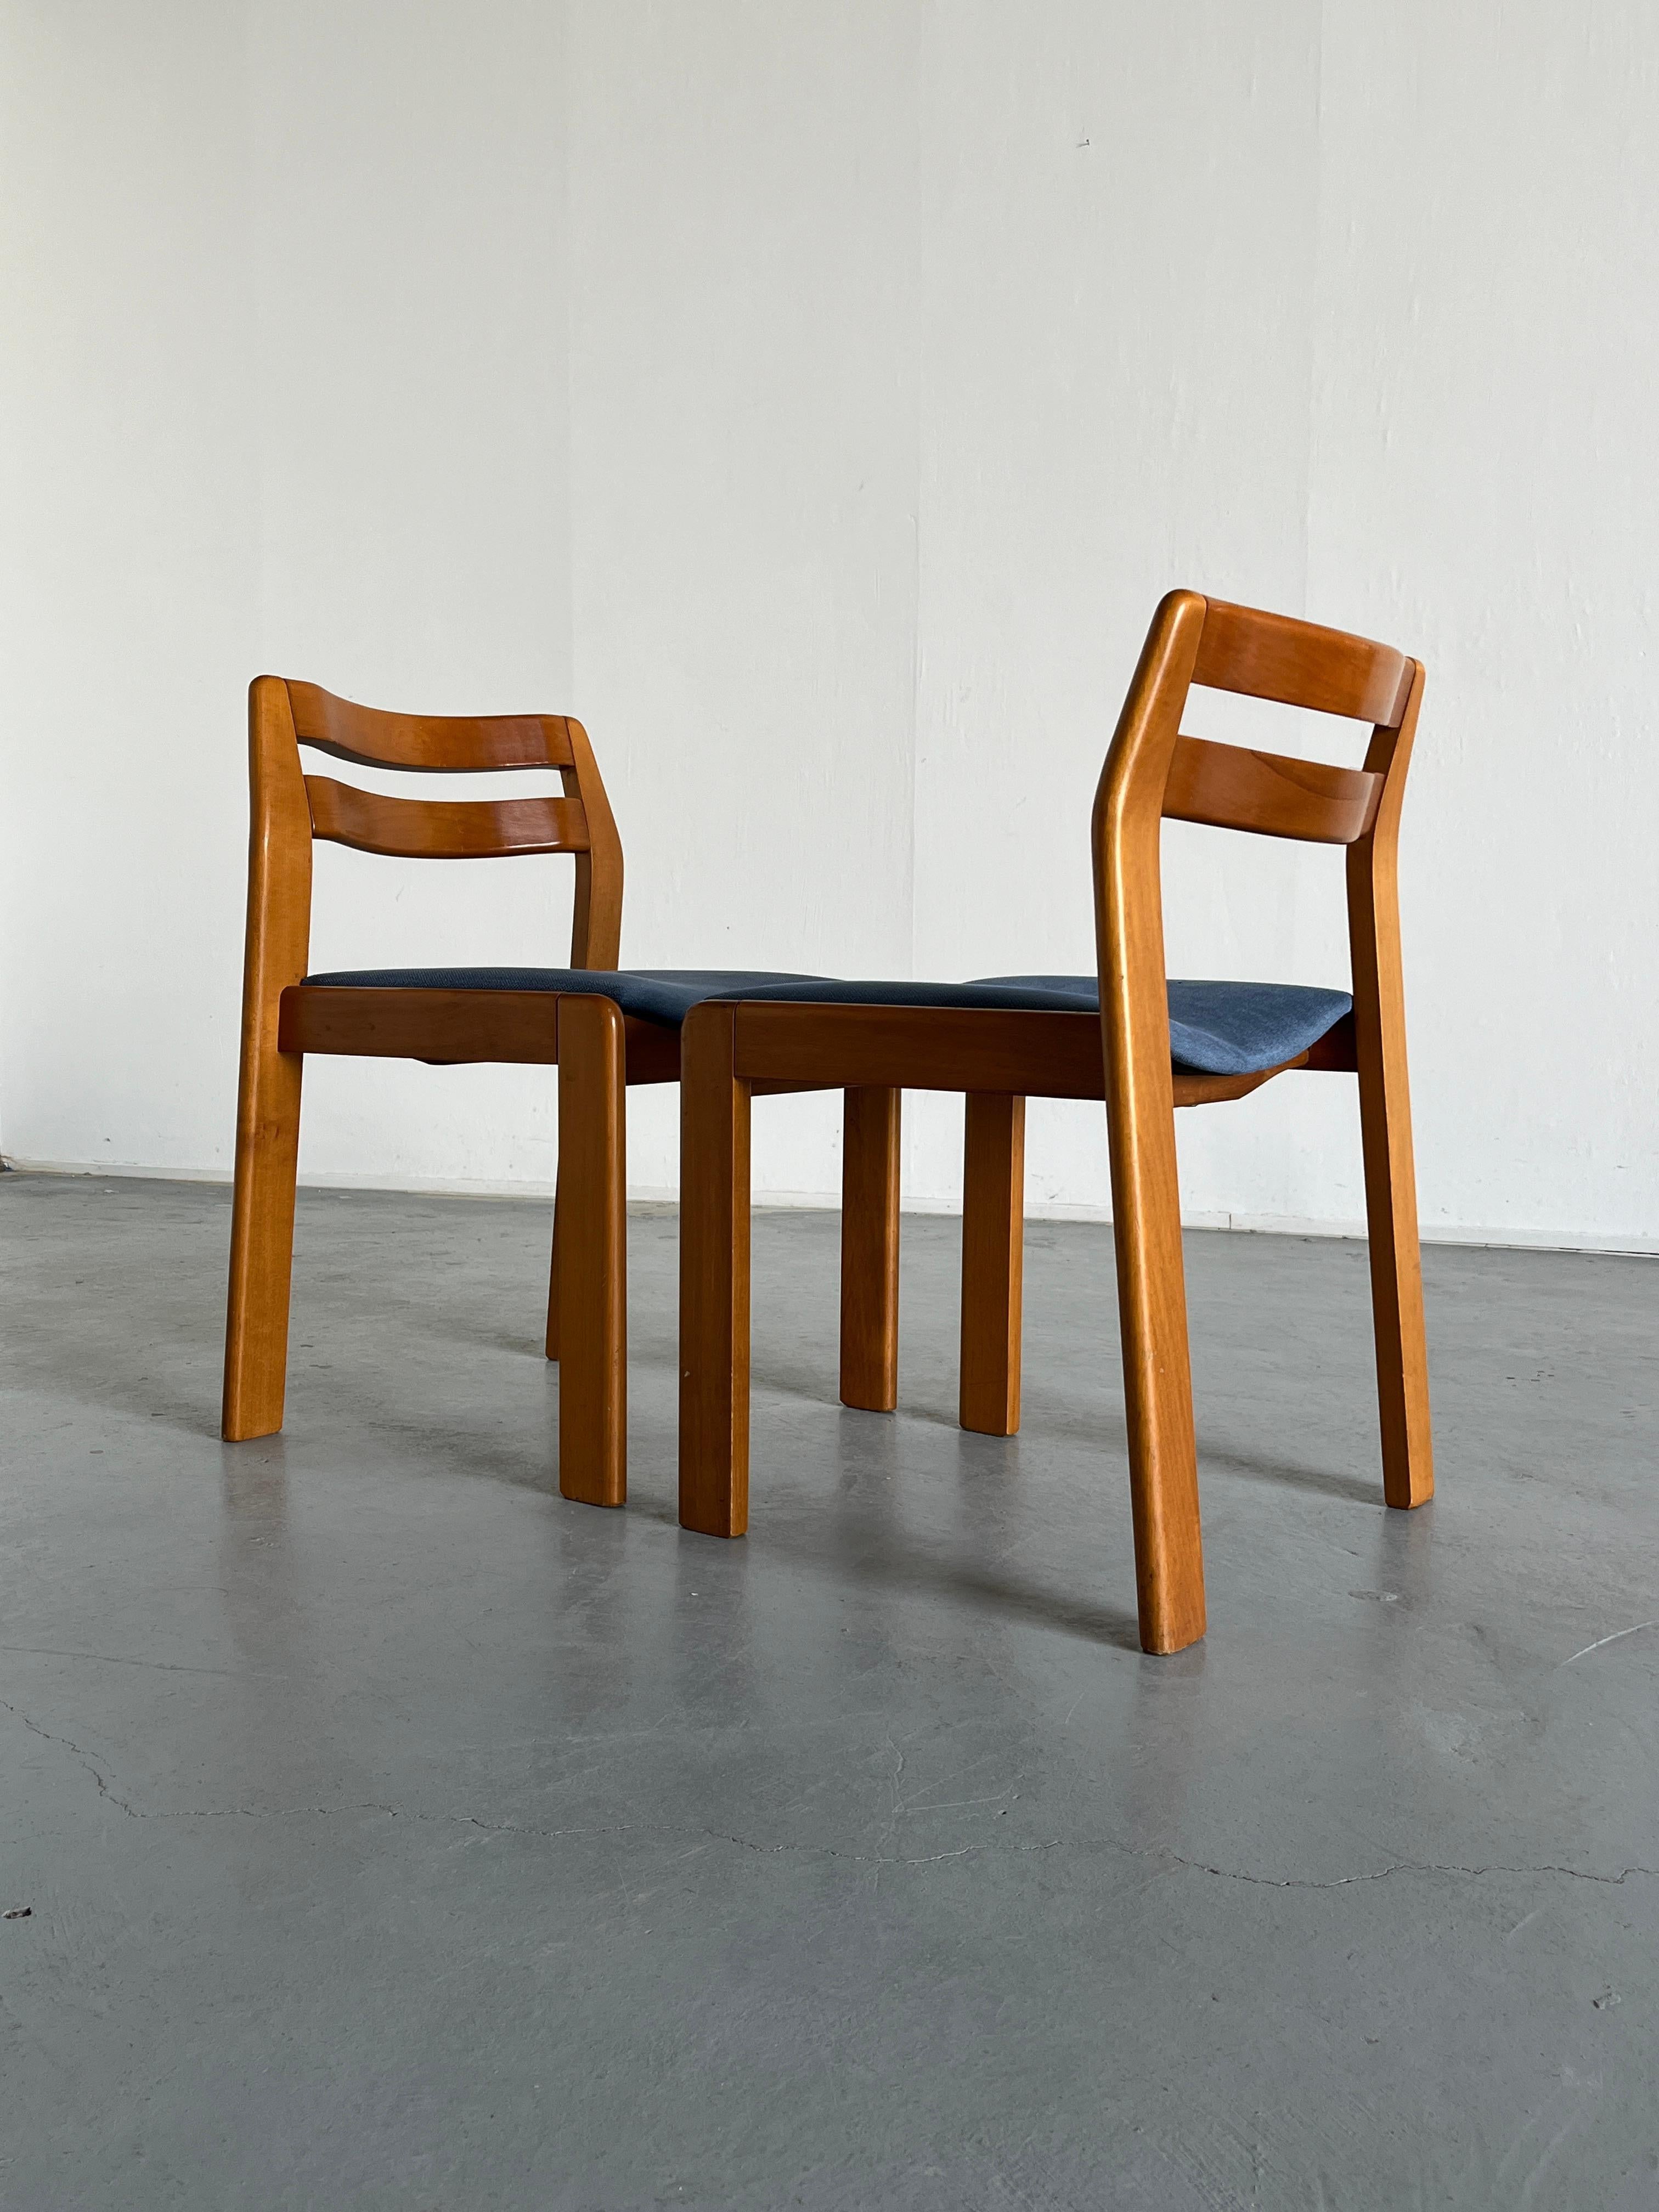 Pair of Elegant Italian Mid-Century Modern Lacquered Wood Dining Chairs, 1960s For Sale 2